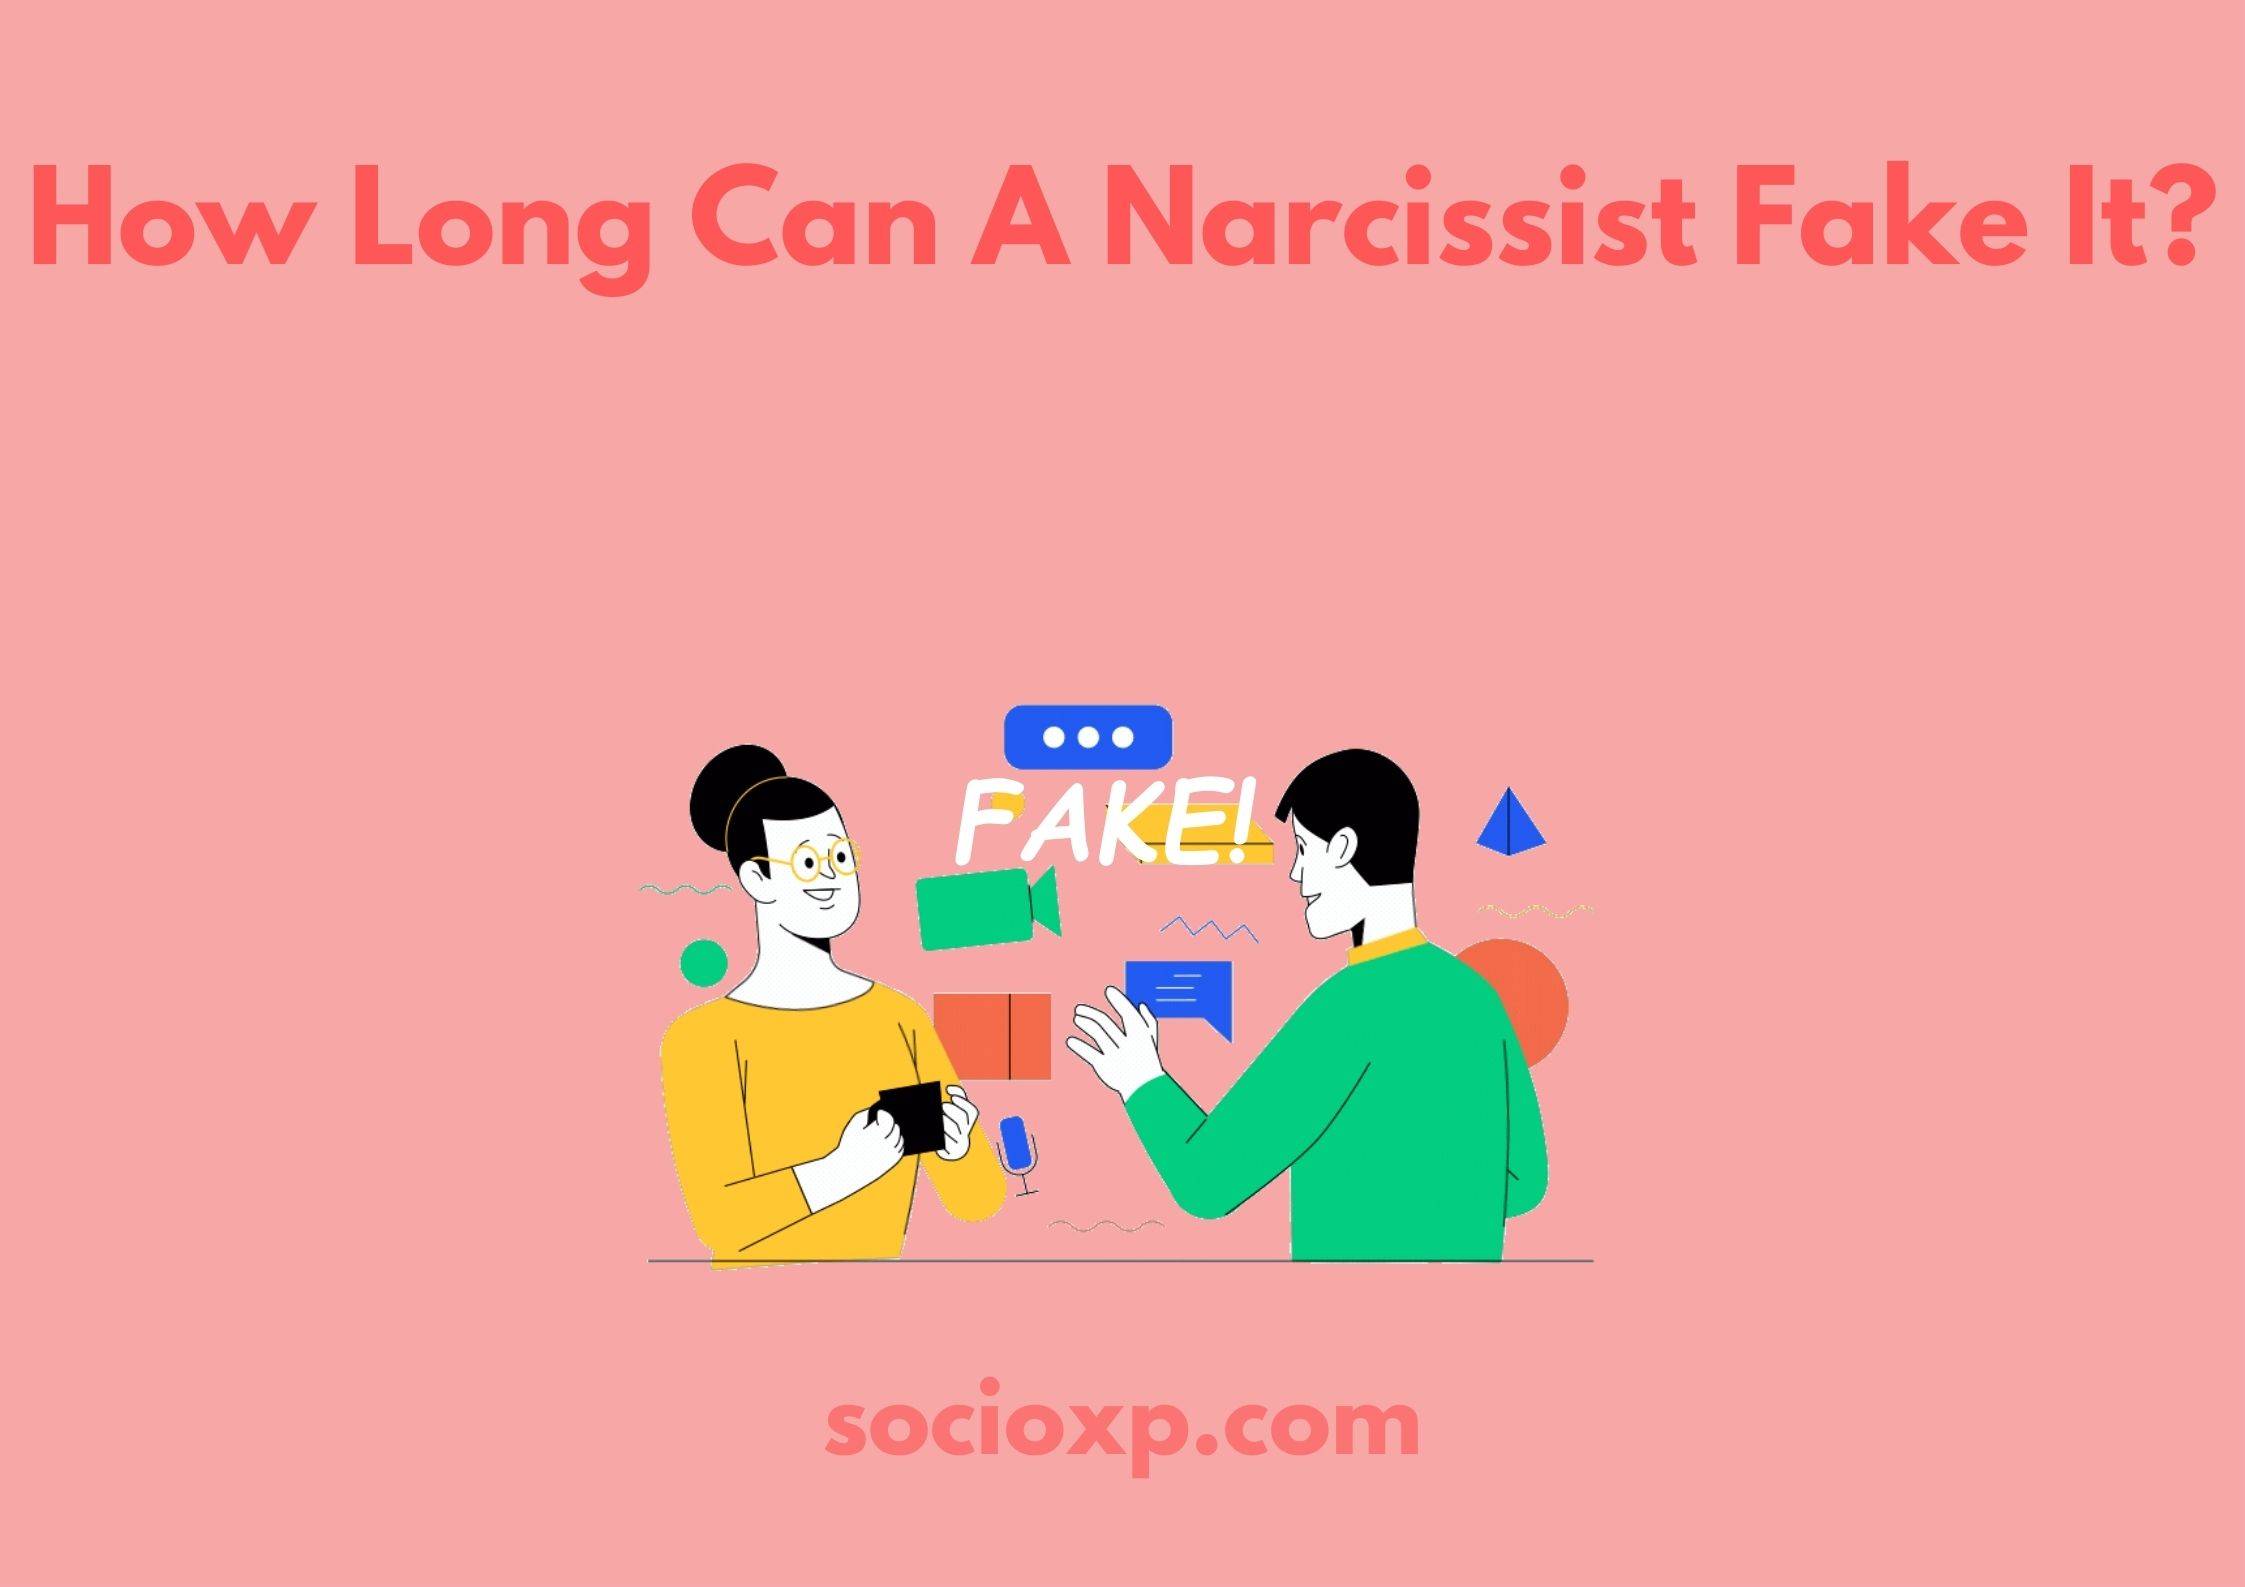 How Long Can A Narcissist Fake It?